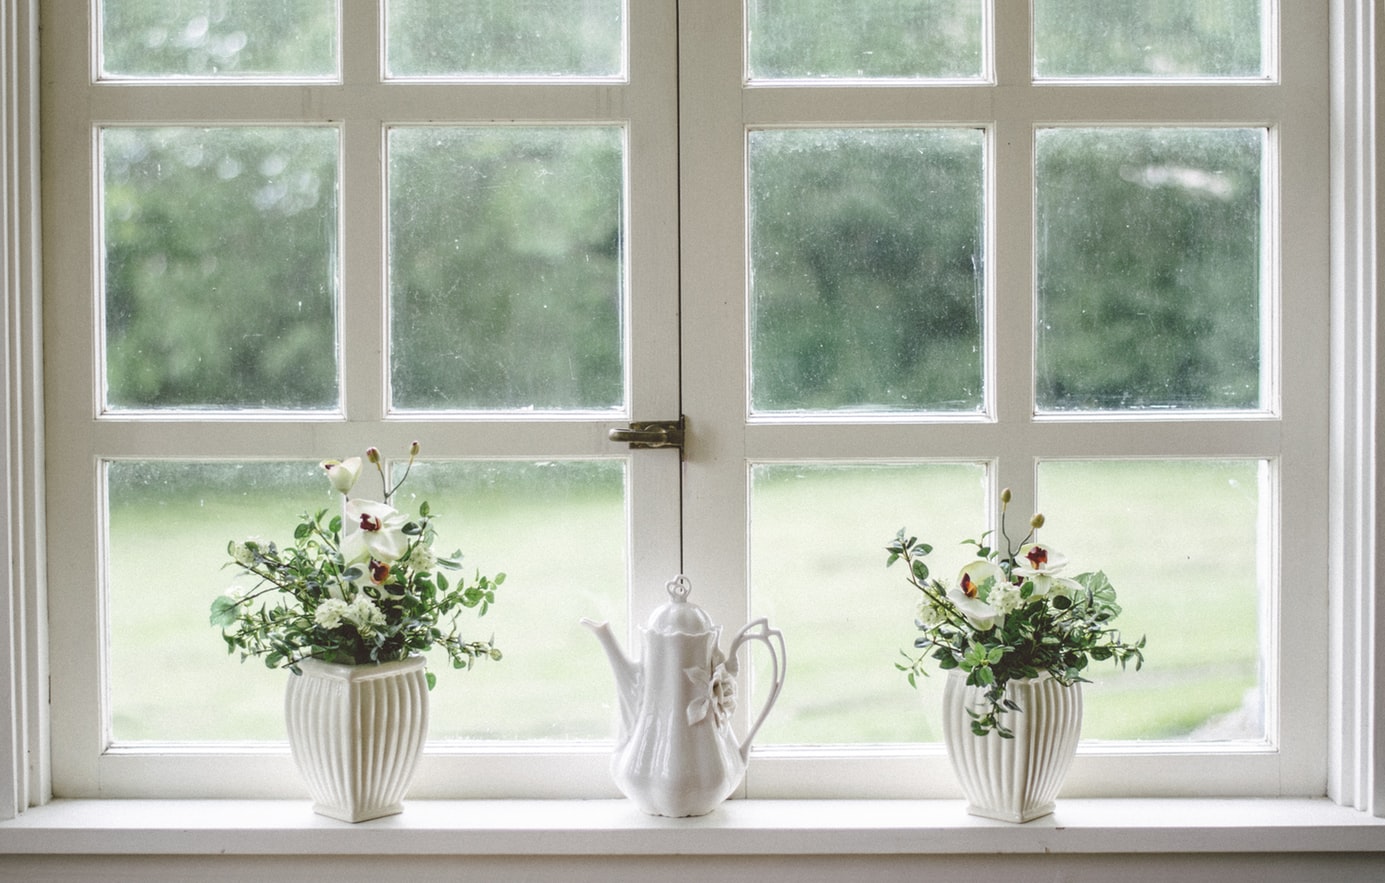 Window made up of small square glass panes. A teapot in front of it and in the middle. Two potted flower plants on each side.